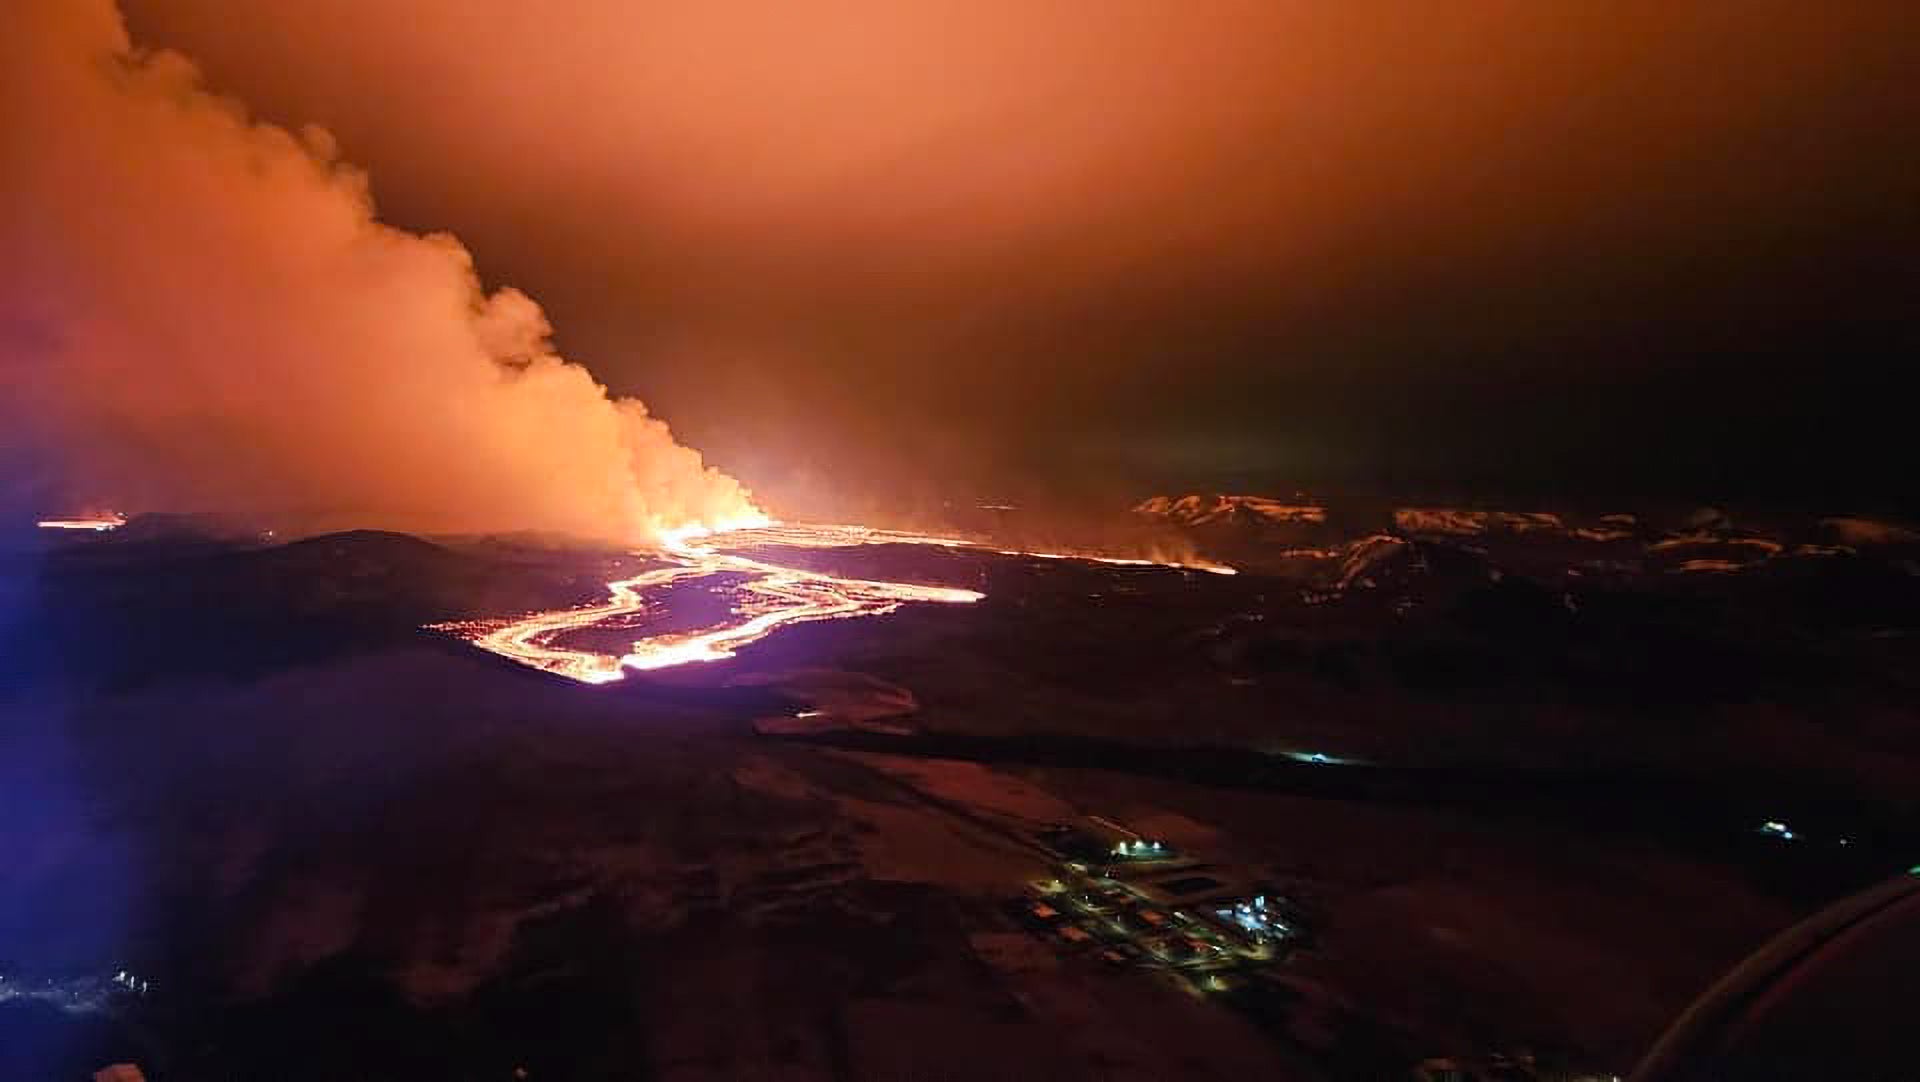 An aerial view of the volcanic eruption near the town of Grindavik